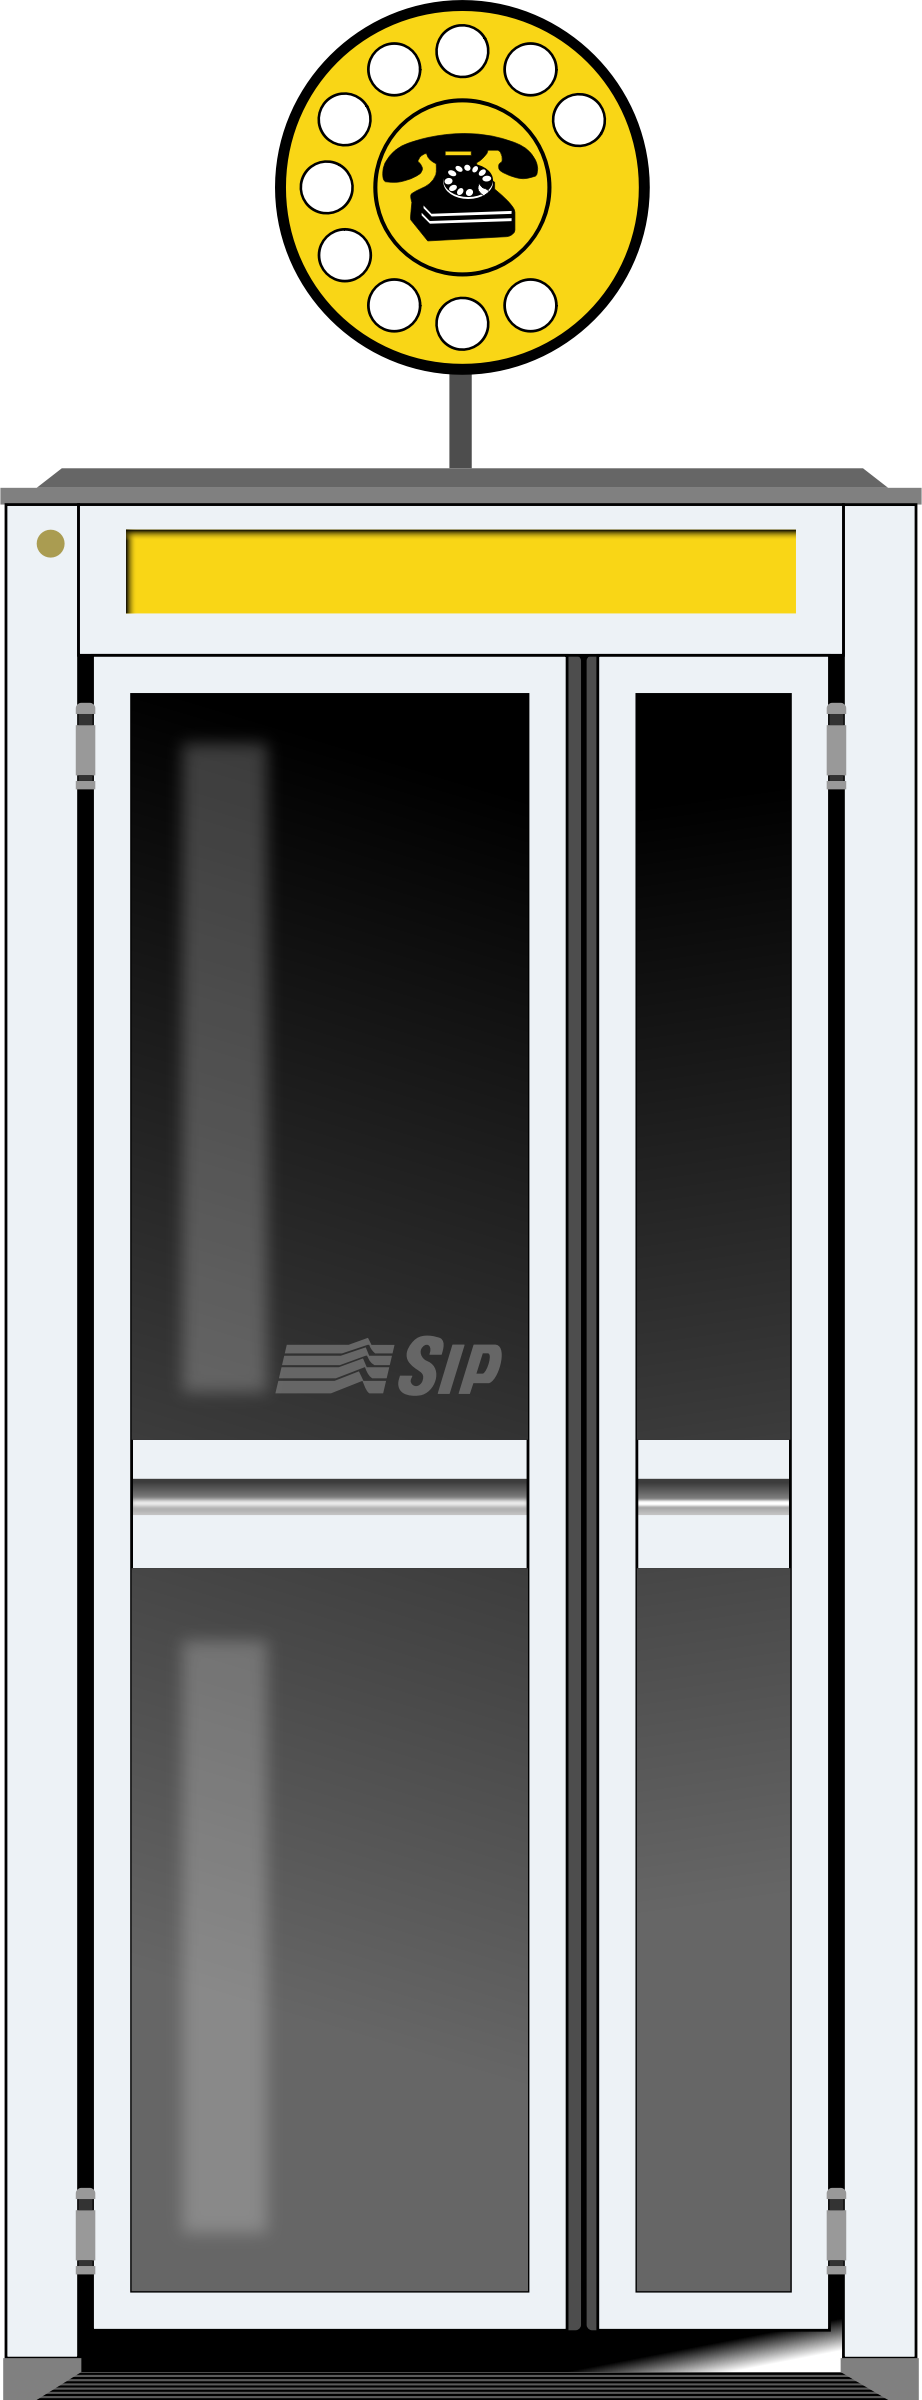 Telephone booth SVG Clip arts